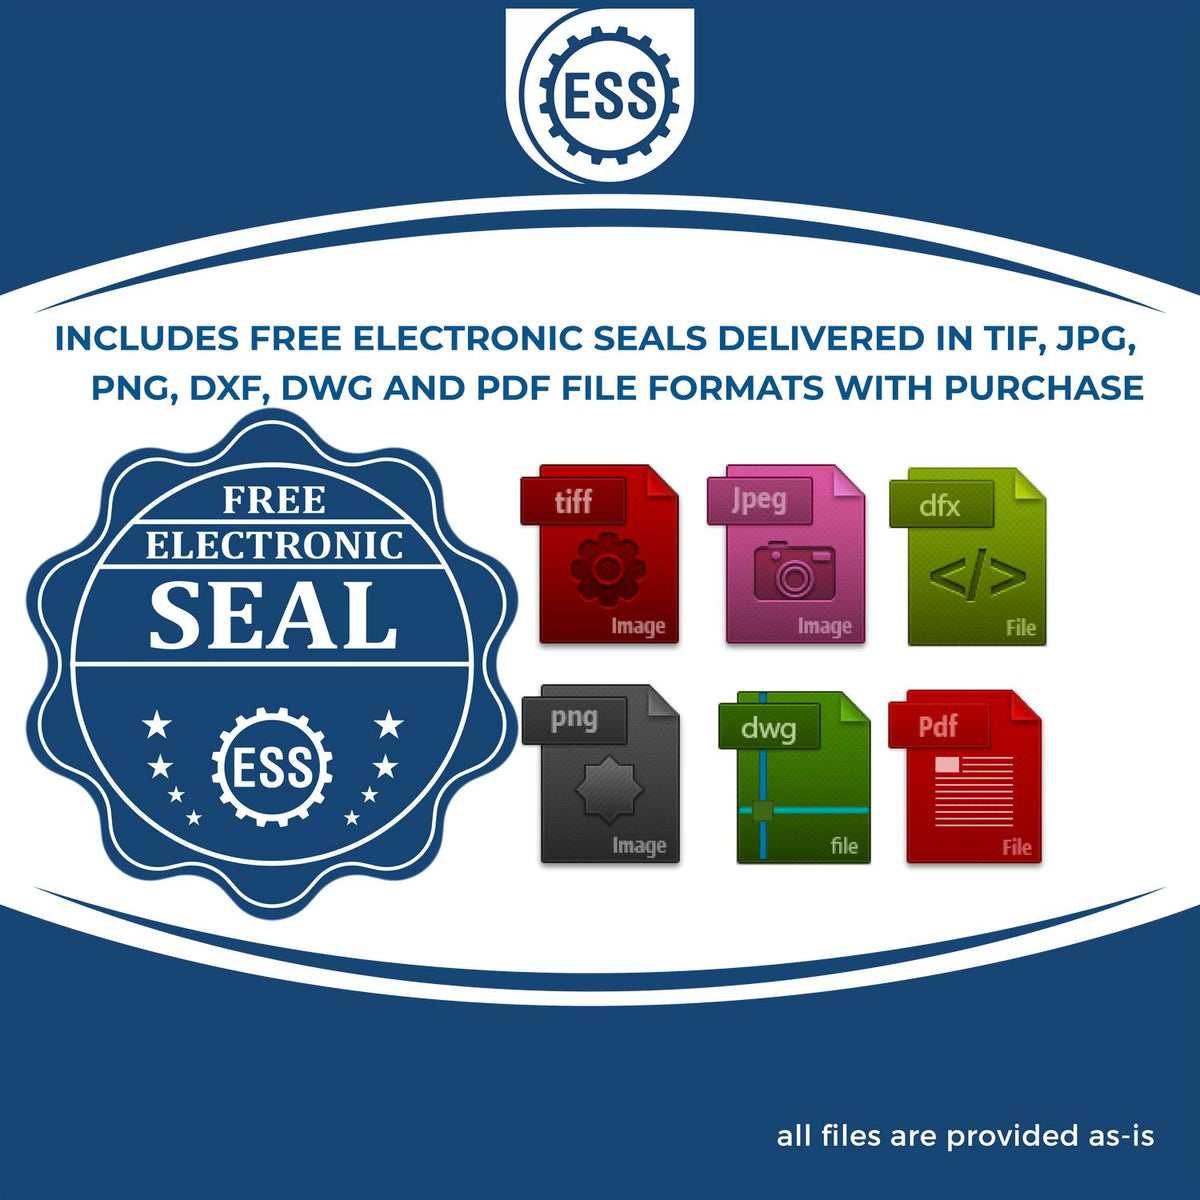 An infographic for the free electronic seal for the Extended Long Reach Massachusetts Surveyor Embosser illustrating the different file type icons such as DXF, DWG, TIF, JPG and PNG.